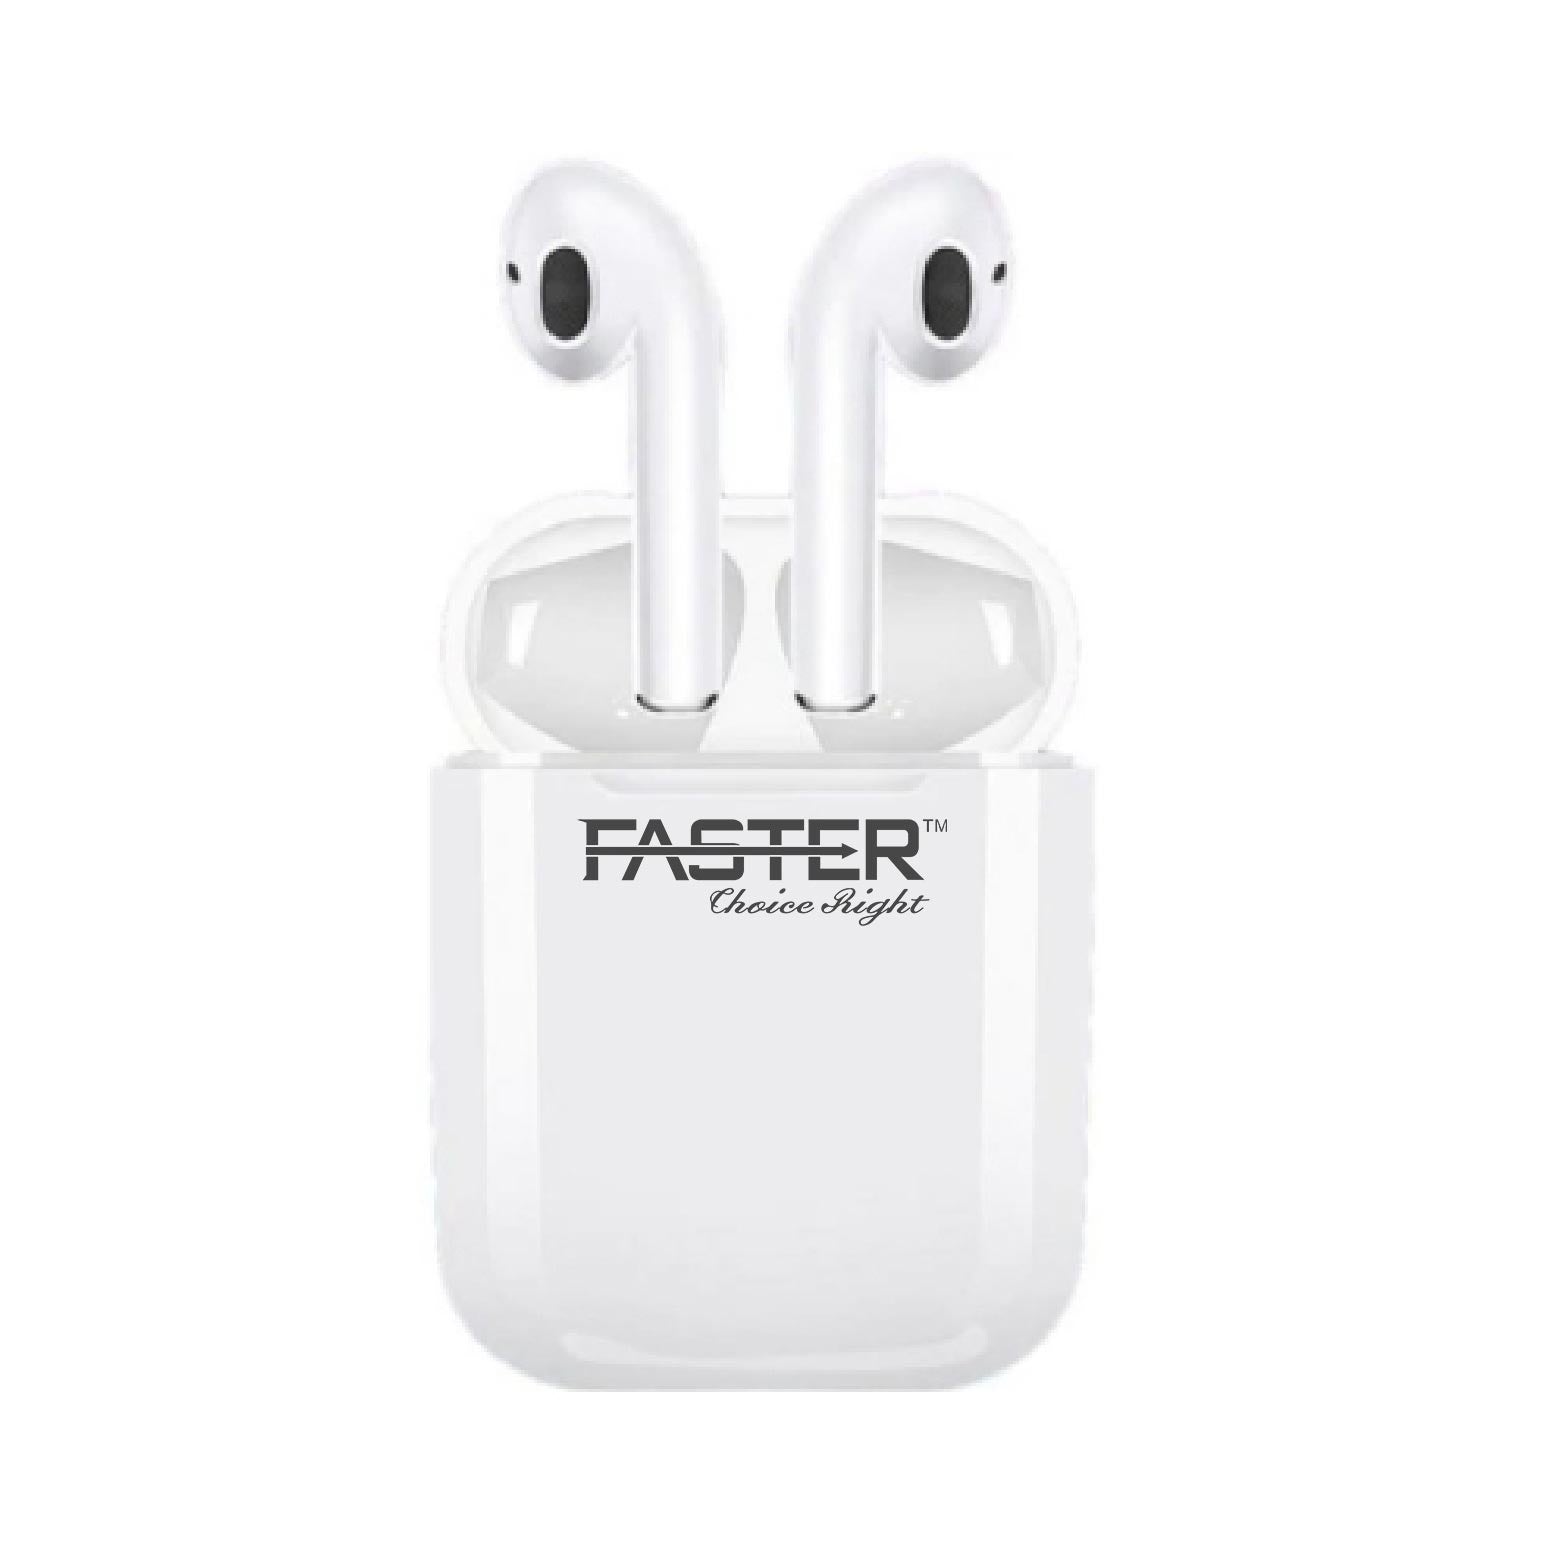 Faster Stereo Sound Wireless Earbuds Price in Pakistan 